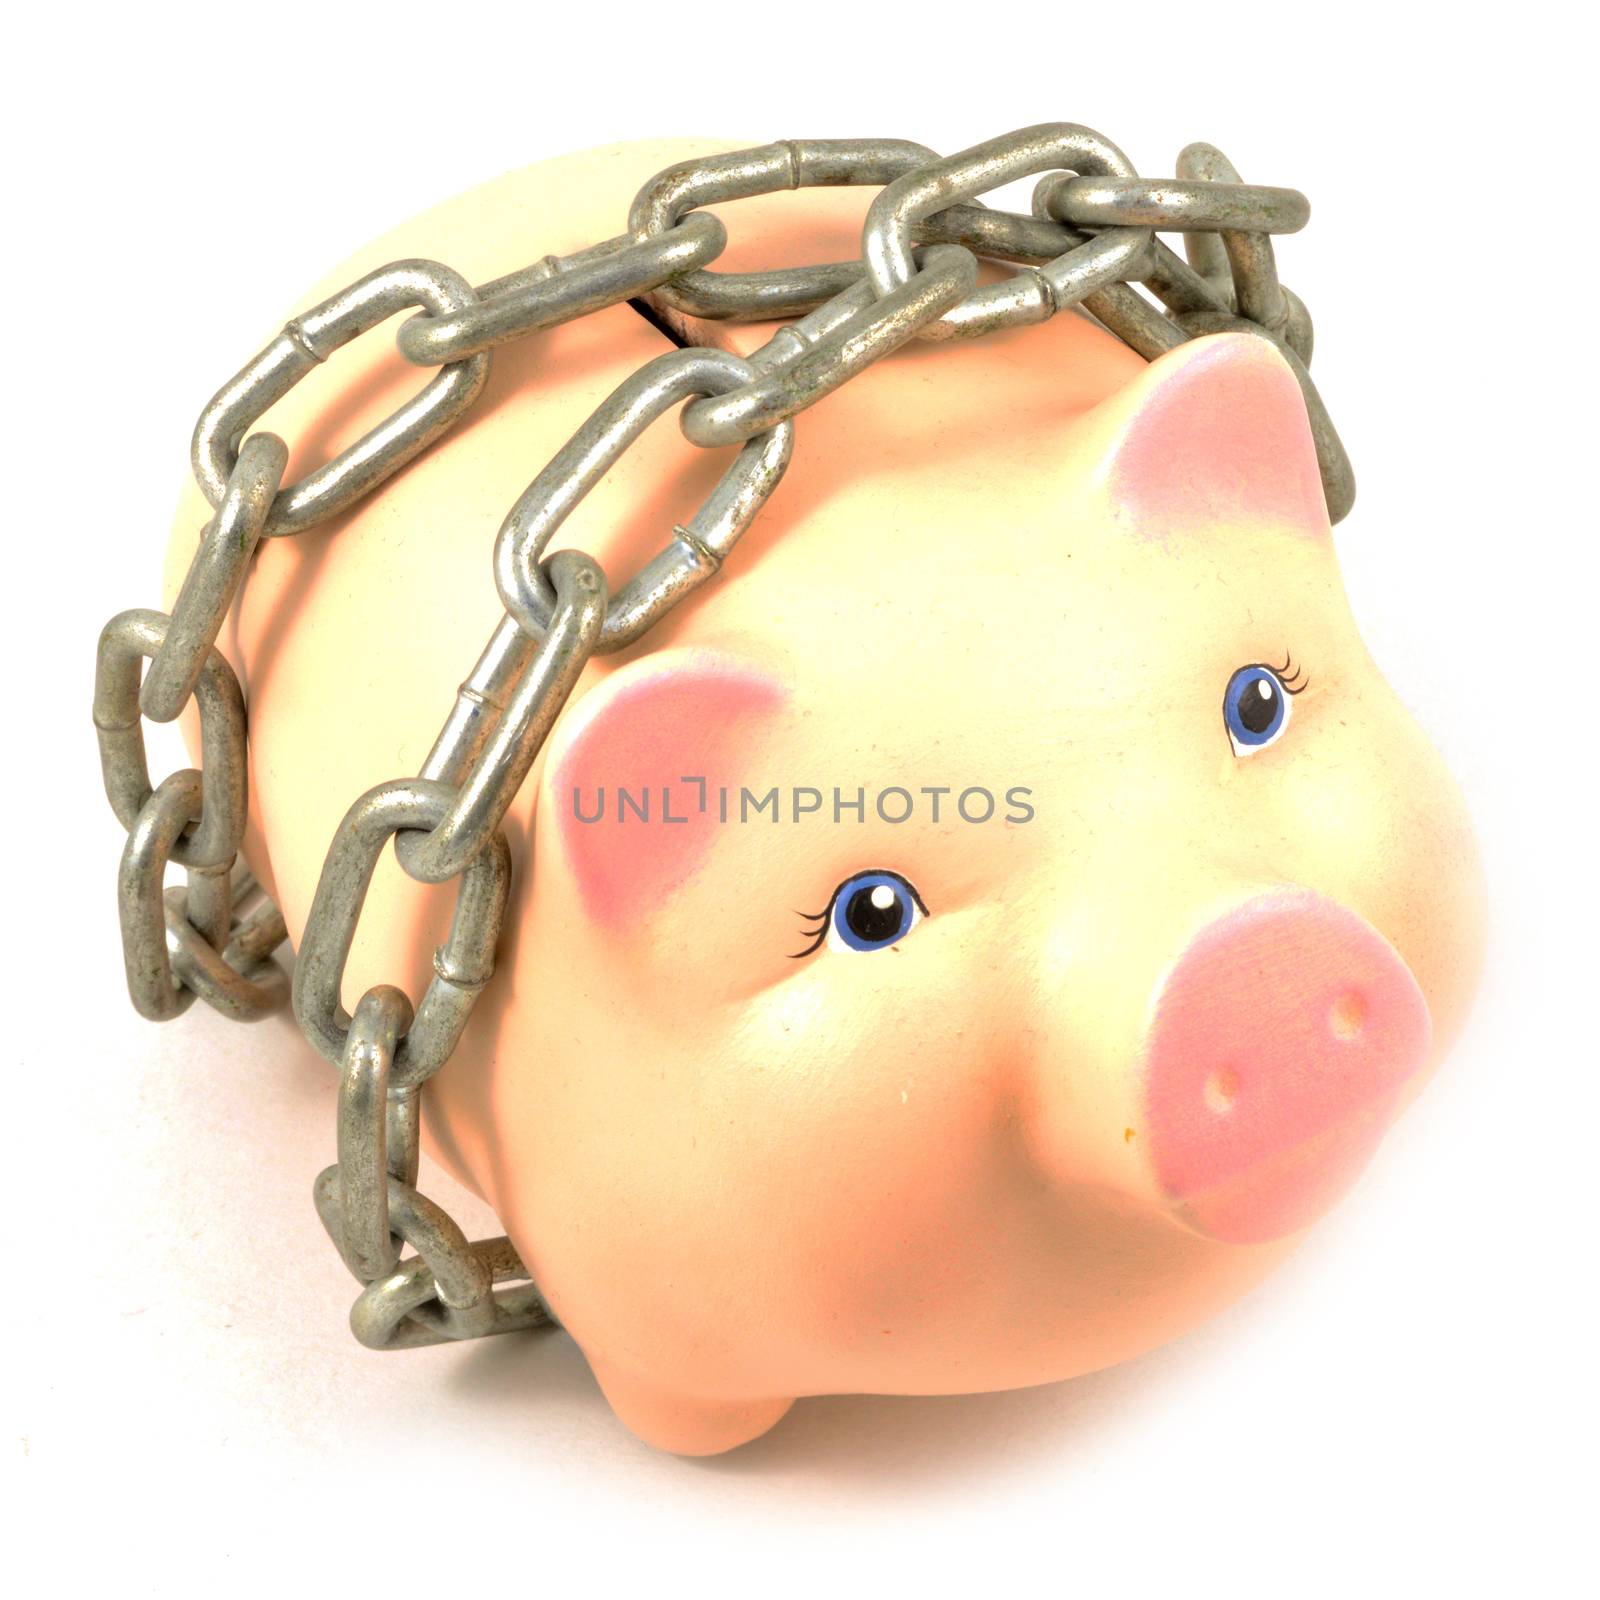 An isolated over white background image of a piggy bank wrapped in a steel chain for added security of savings.